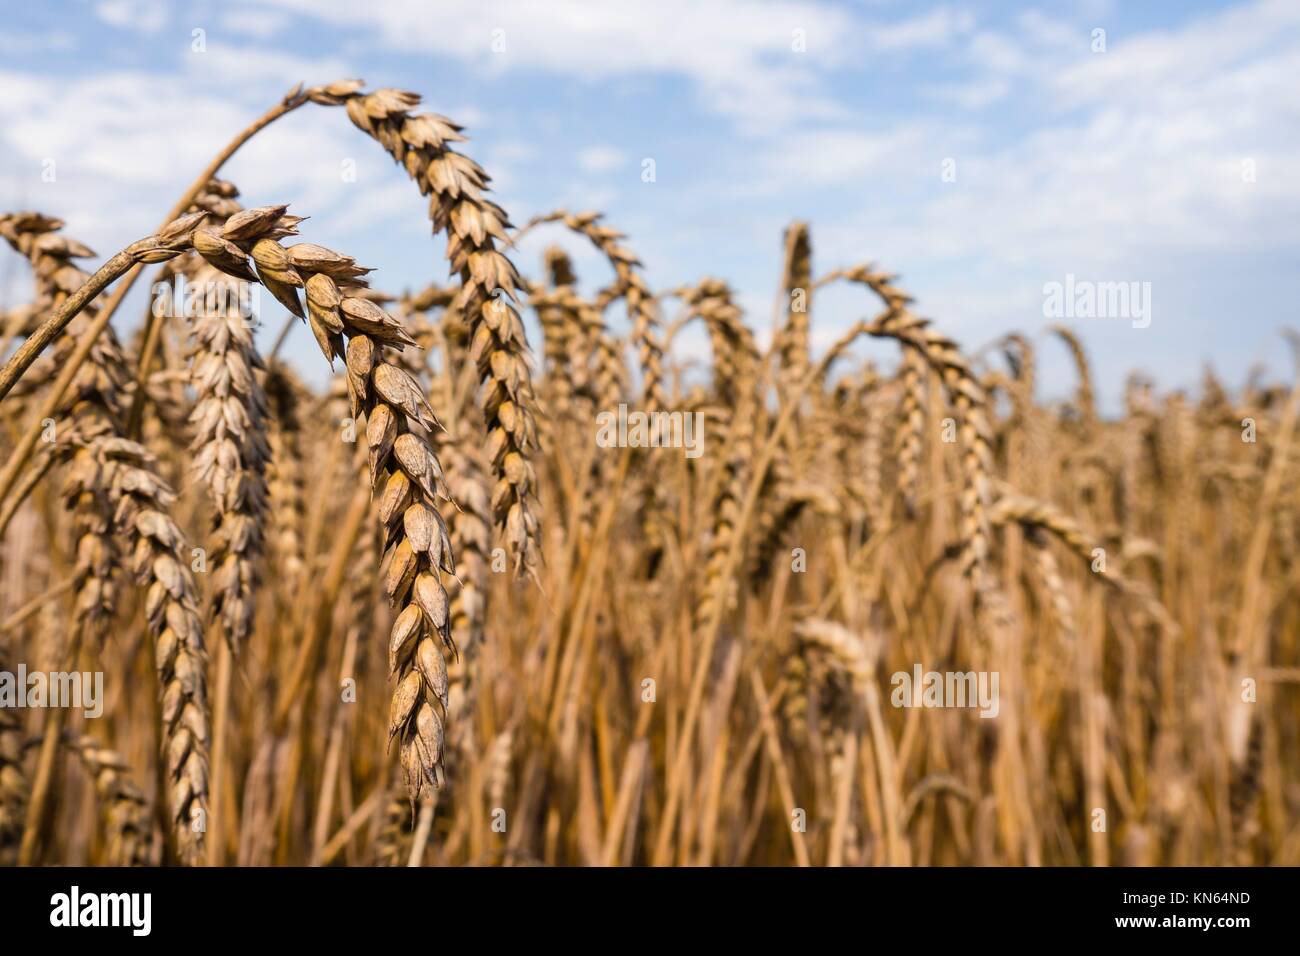 wheat ear on field with blue sky and clouds. Stock Photo